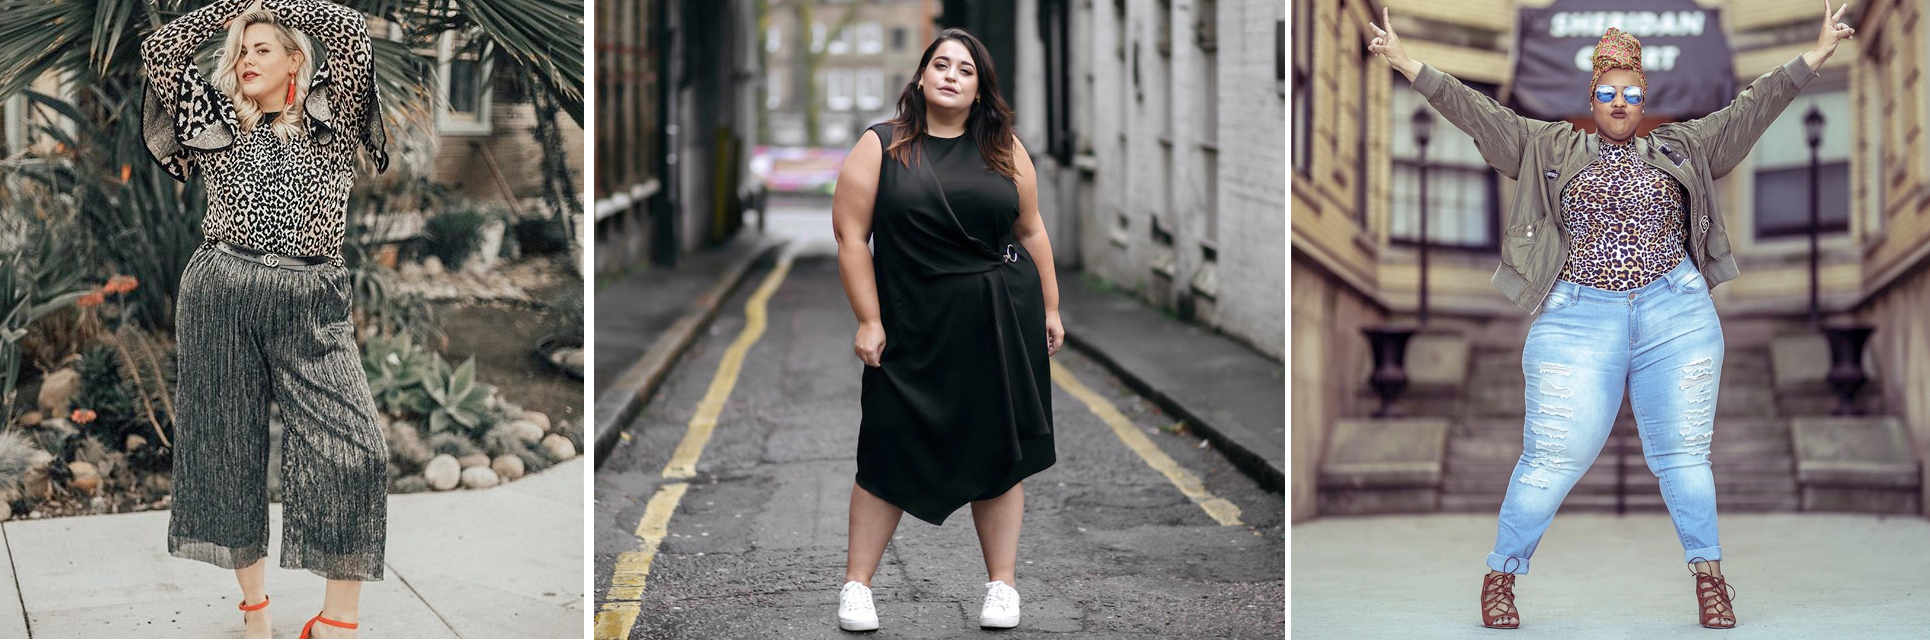 Plus size style inspiration for 2018: Alex Michael May, Danielle Vanier and Leah Vernon